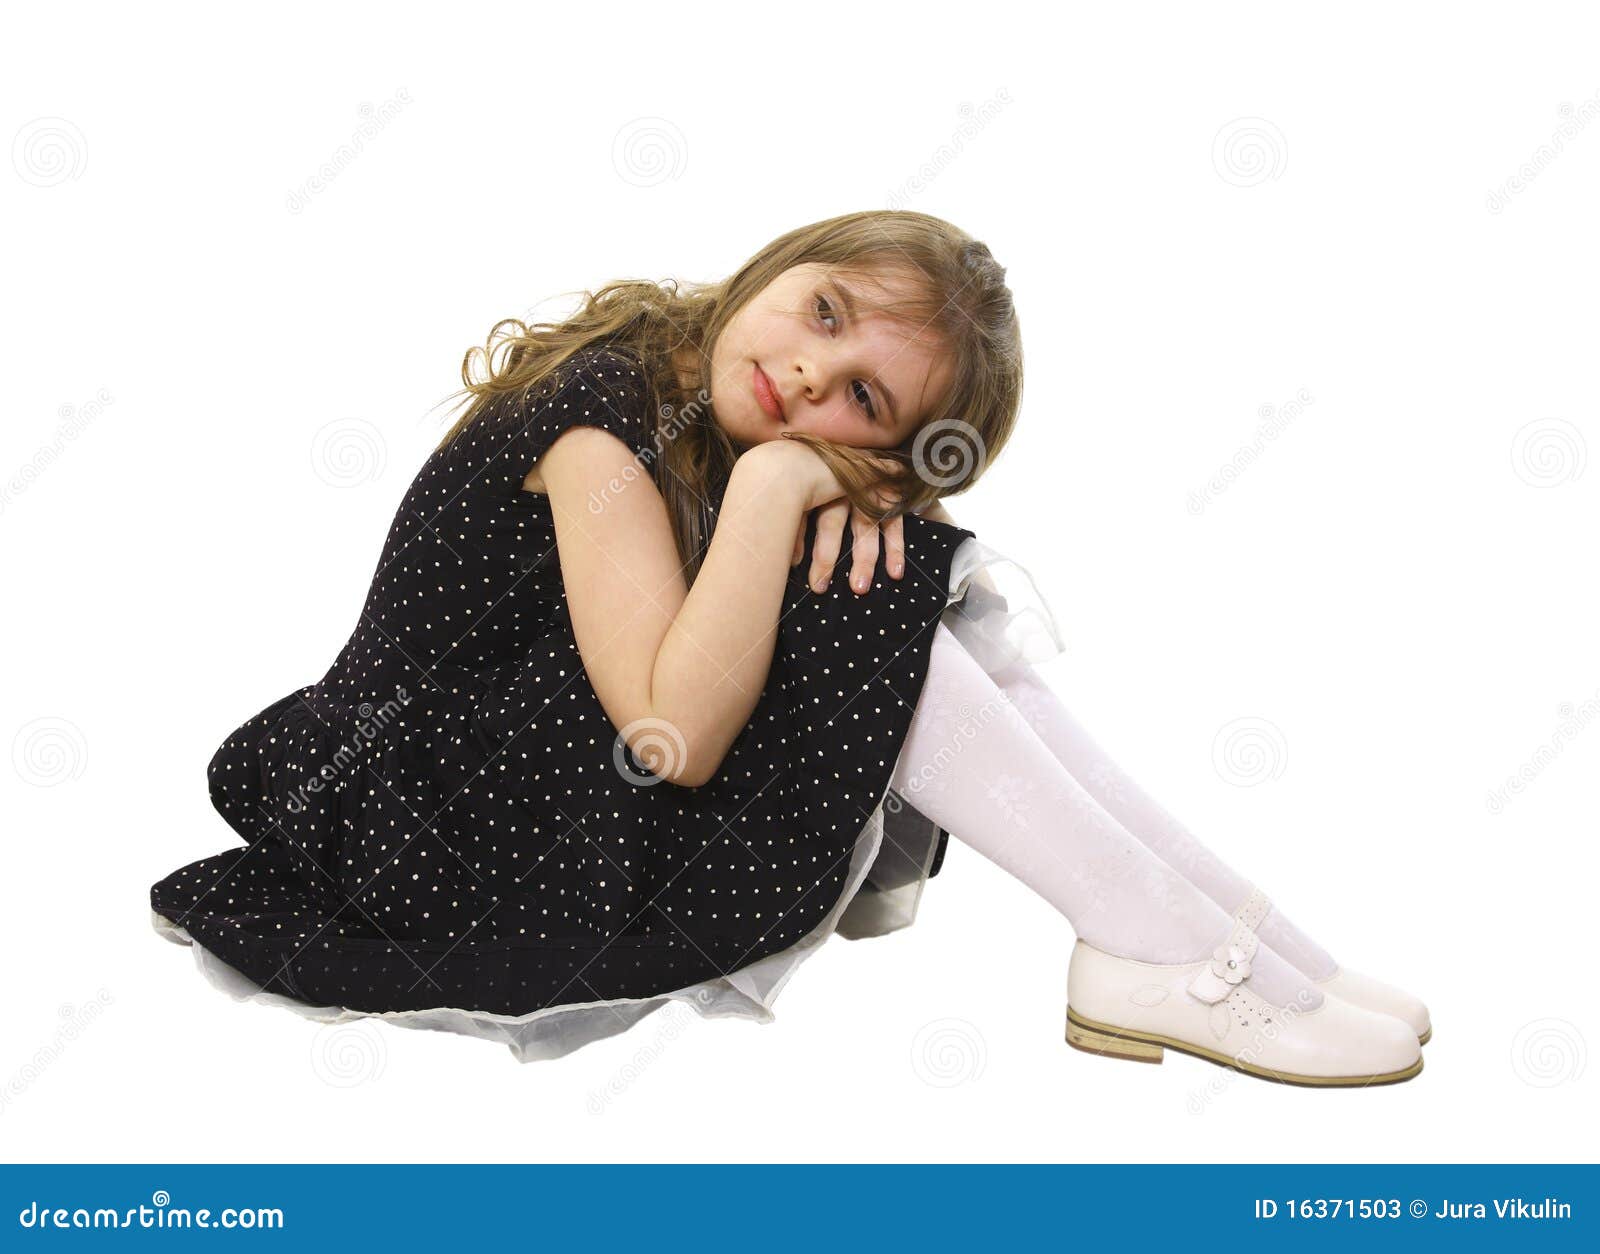 It Was Conceived stock image. Image of teenage, portrait - 16371503